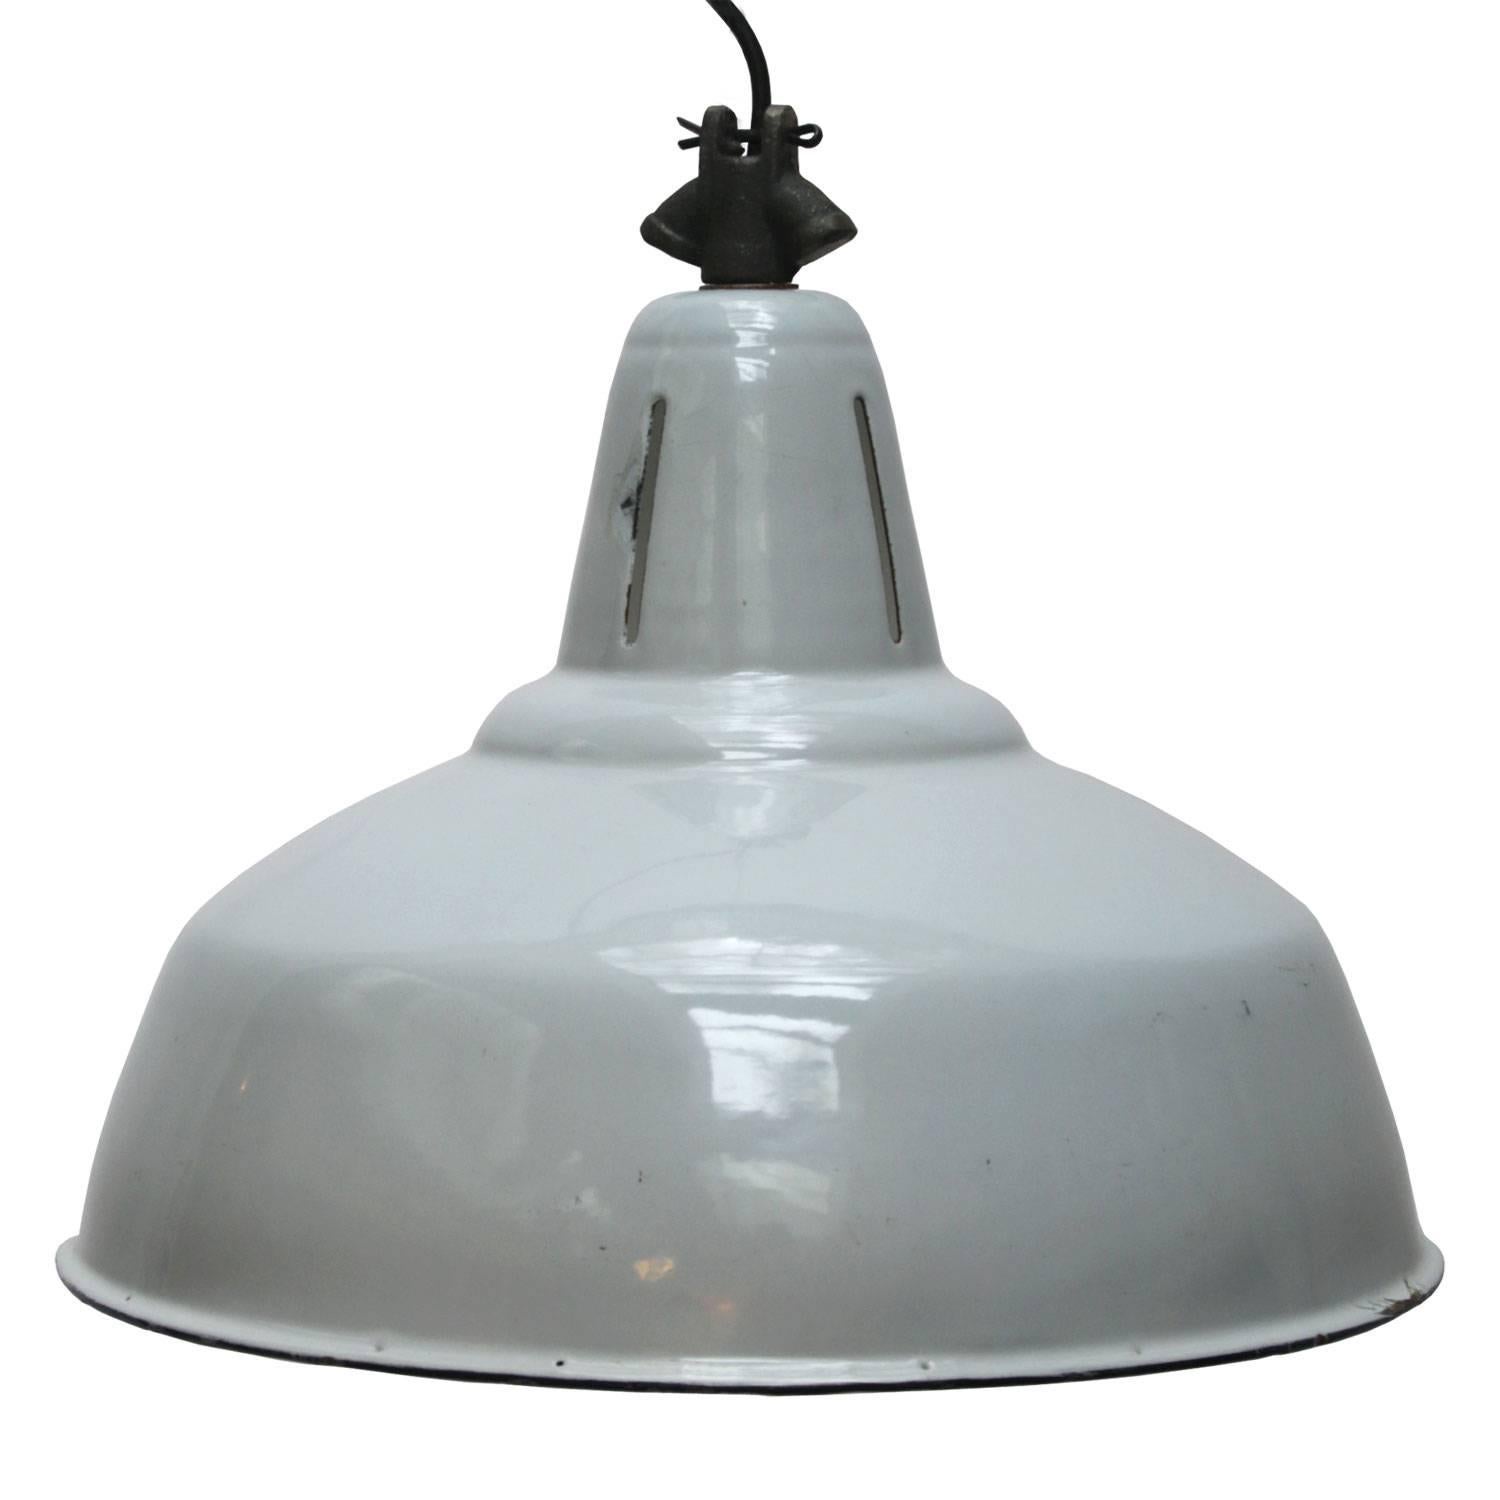 Industrial hanging lamp made by Philips, Holland. 
Gray enamel white interior.

Measure: Weight 3.7 kg / 8.2 lb

All lamps have been made suitable by international standards for incandescent light bulbs, energy-efficient and LED bulbs. E26/E27 bulb